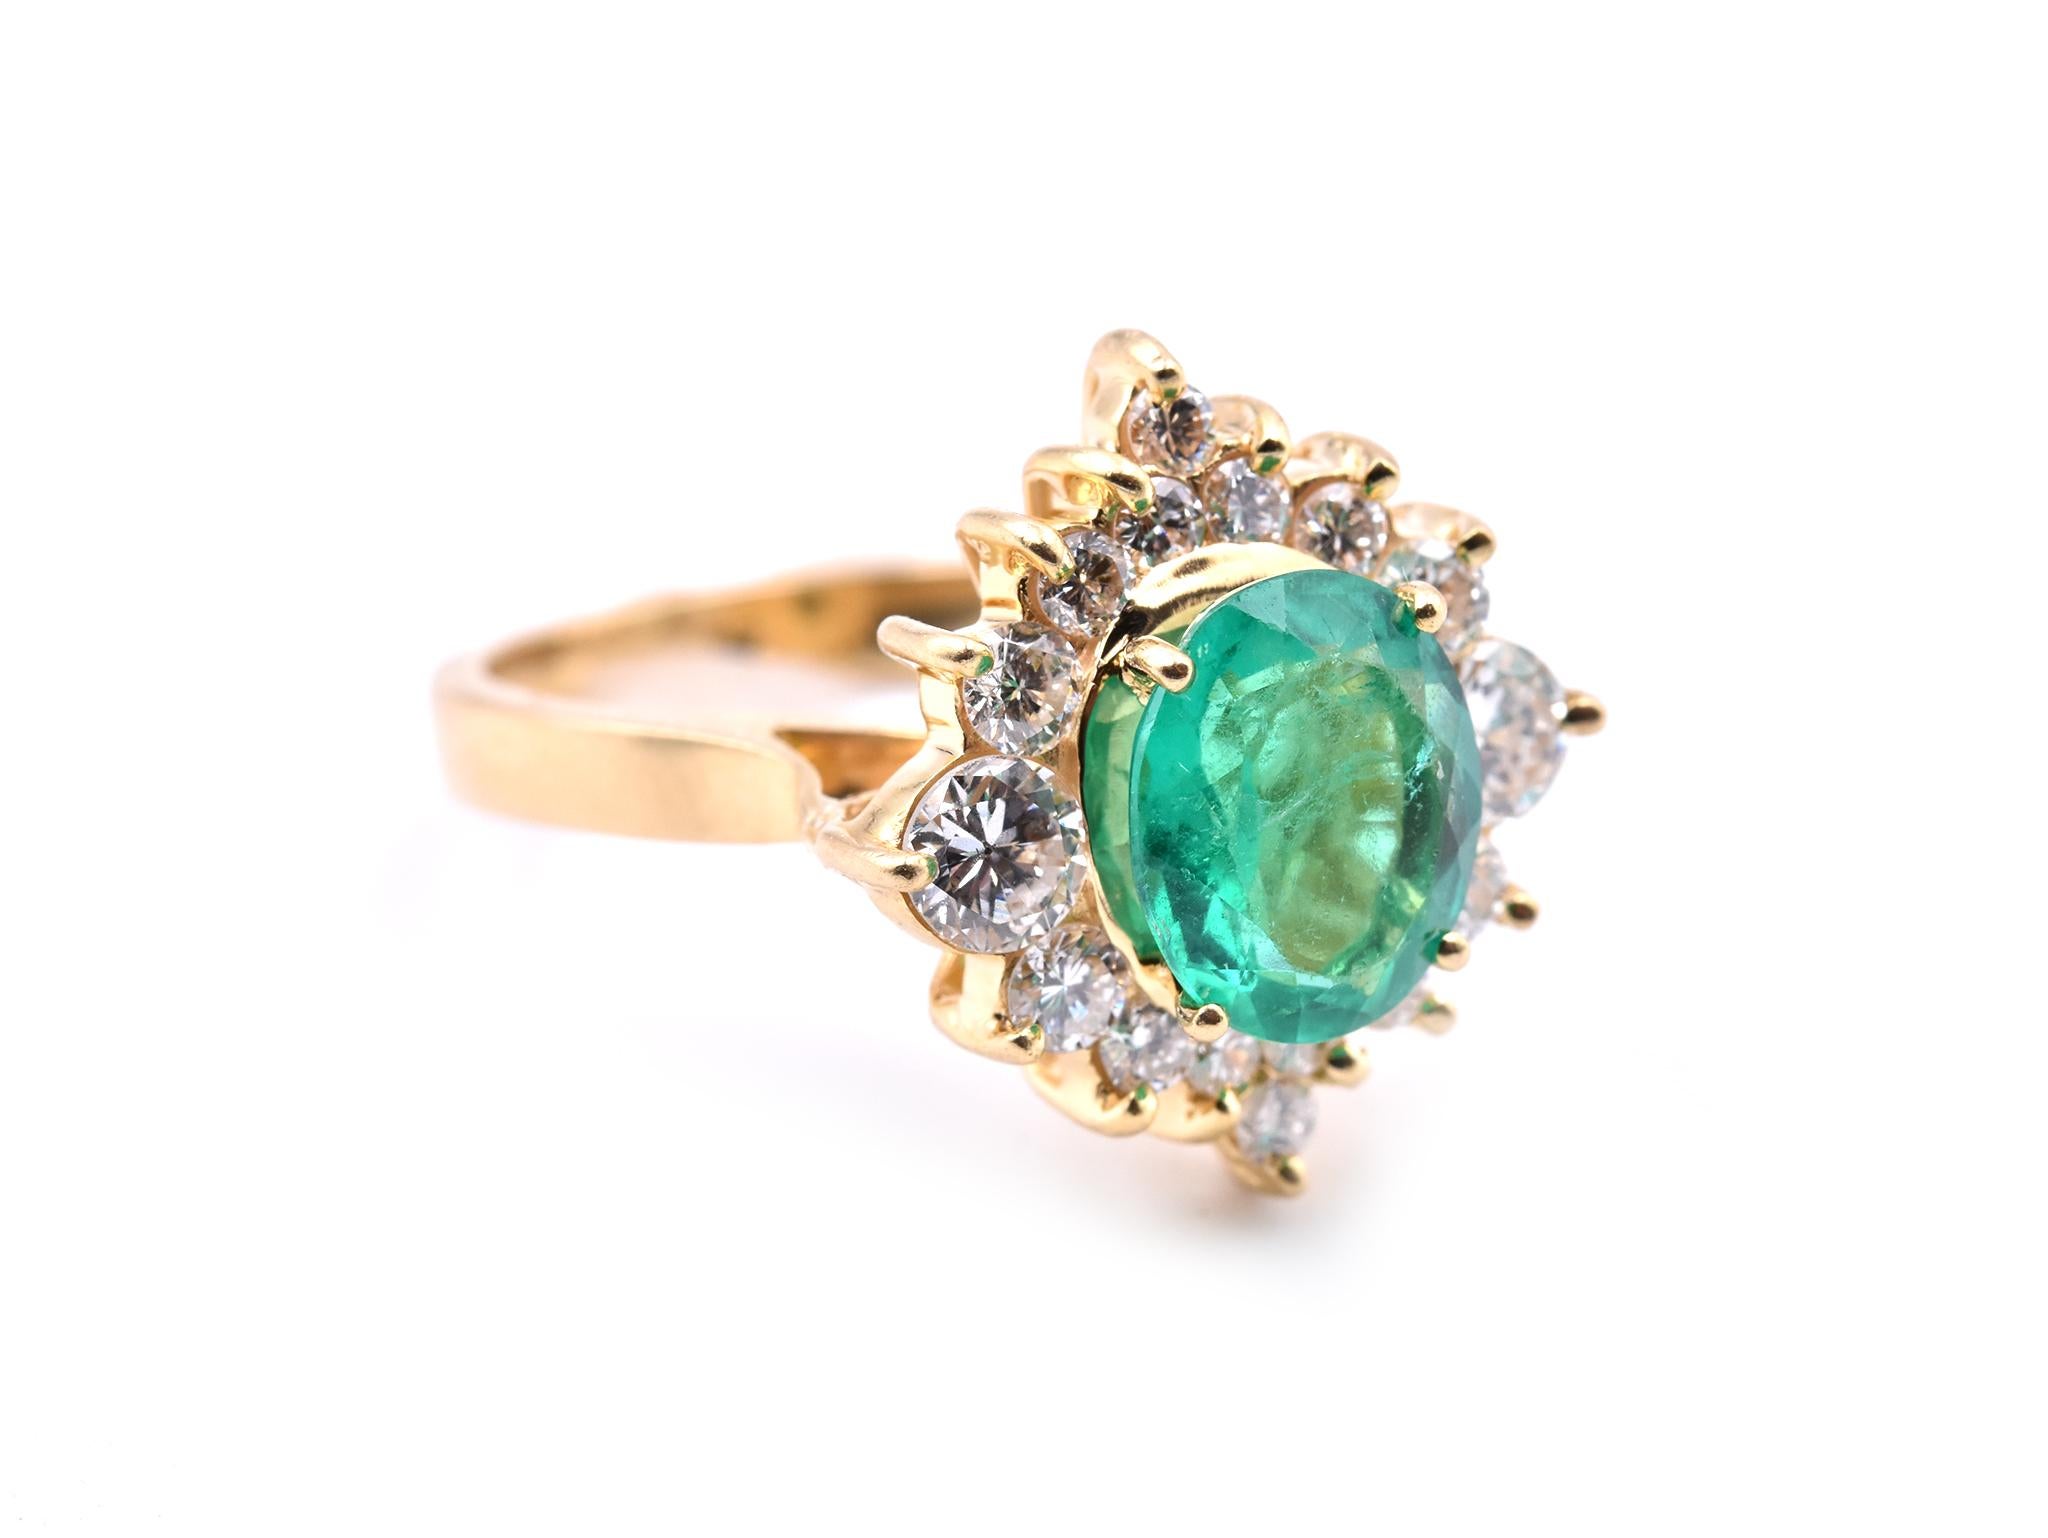 Designer: custom design
Material: 18k yellow gold
Emerald: oval cut= 2.15ct
Diamonds: 16 round brilliant cuts = 1.00cttw
Color: G
Clarity: VS
Ring size: 6 ½ (please allow two additional shipping days for sizing requests)
Dimensions: ring top is